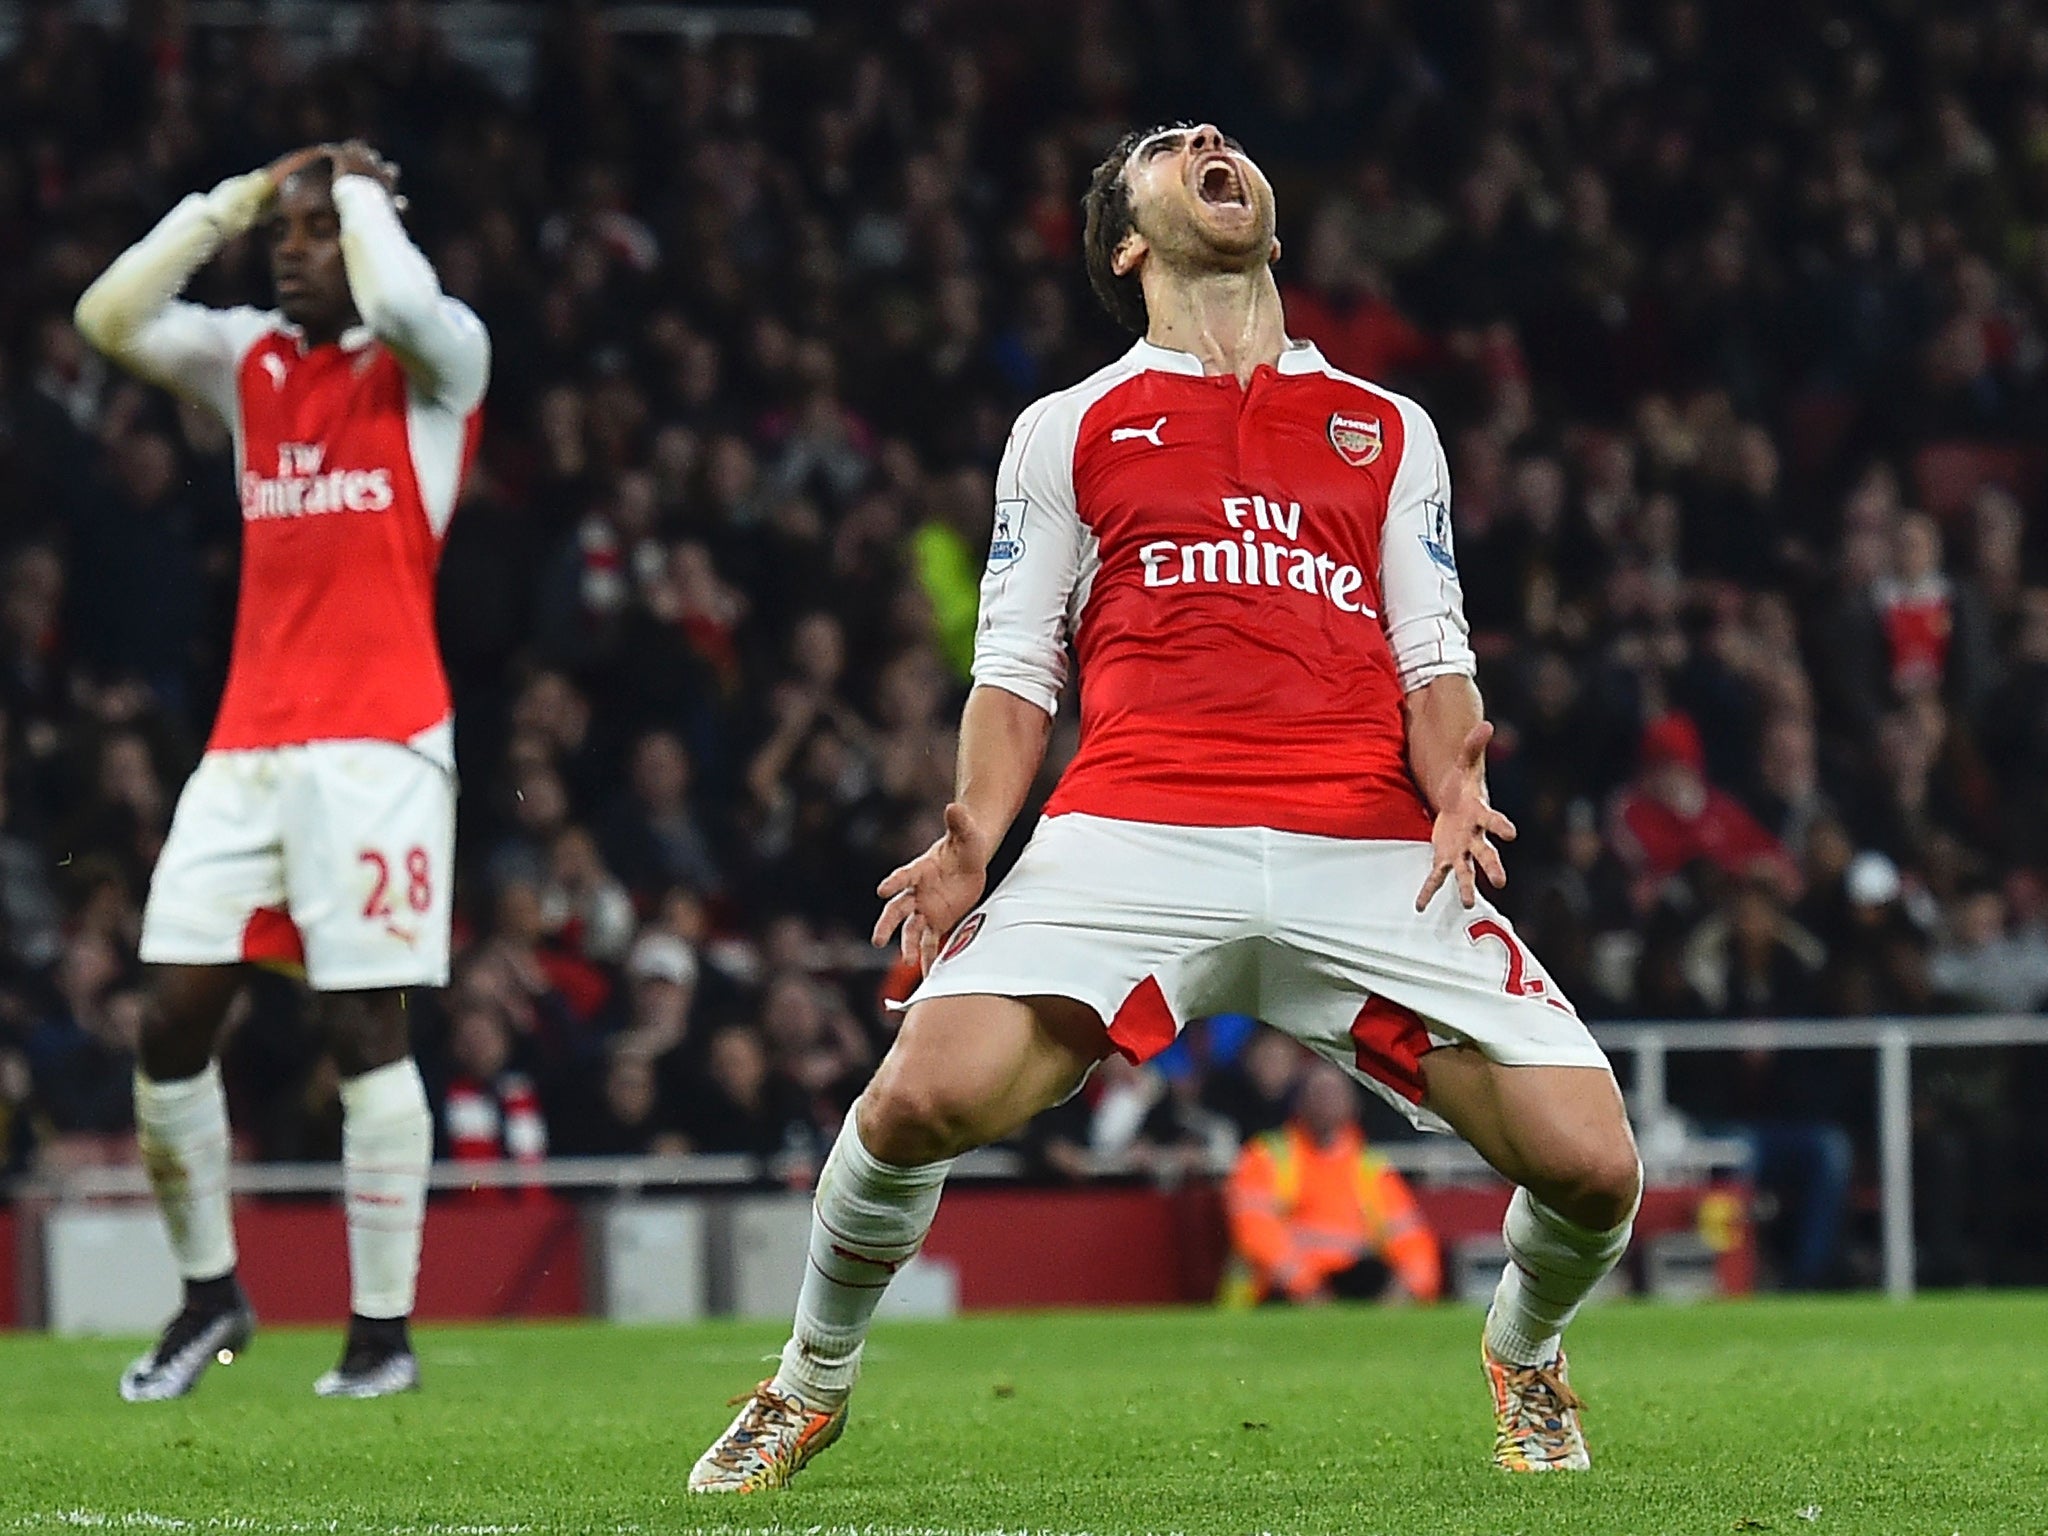 Mathieu Flamini is devastated after missing a chance for Arsenal